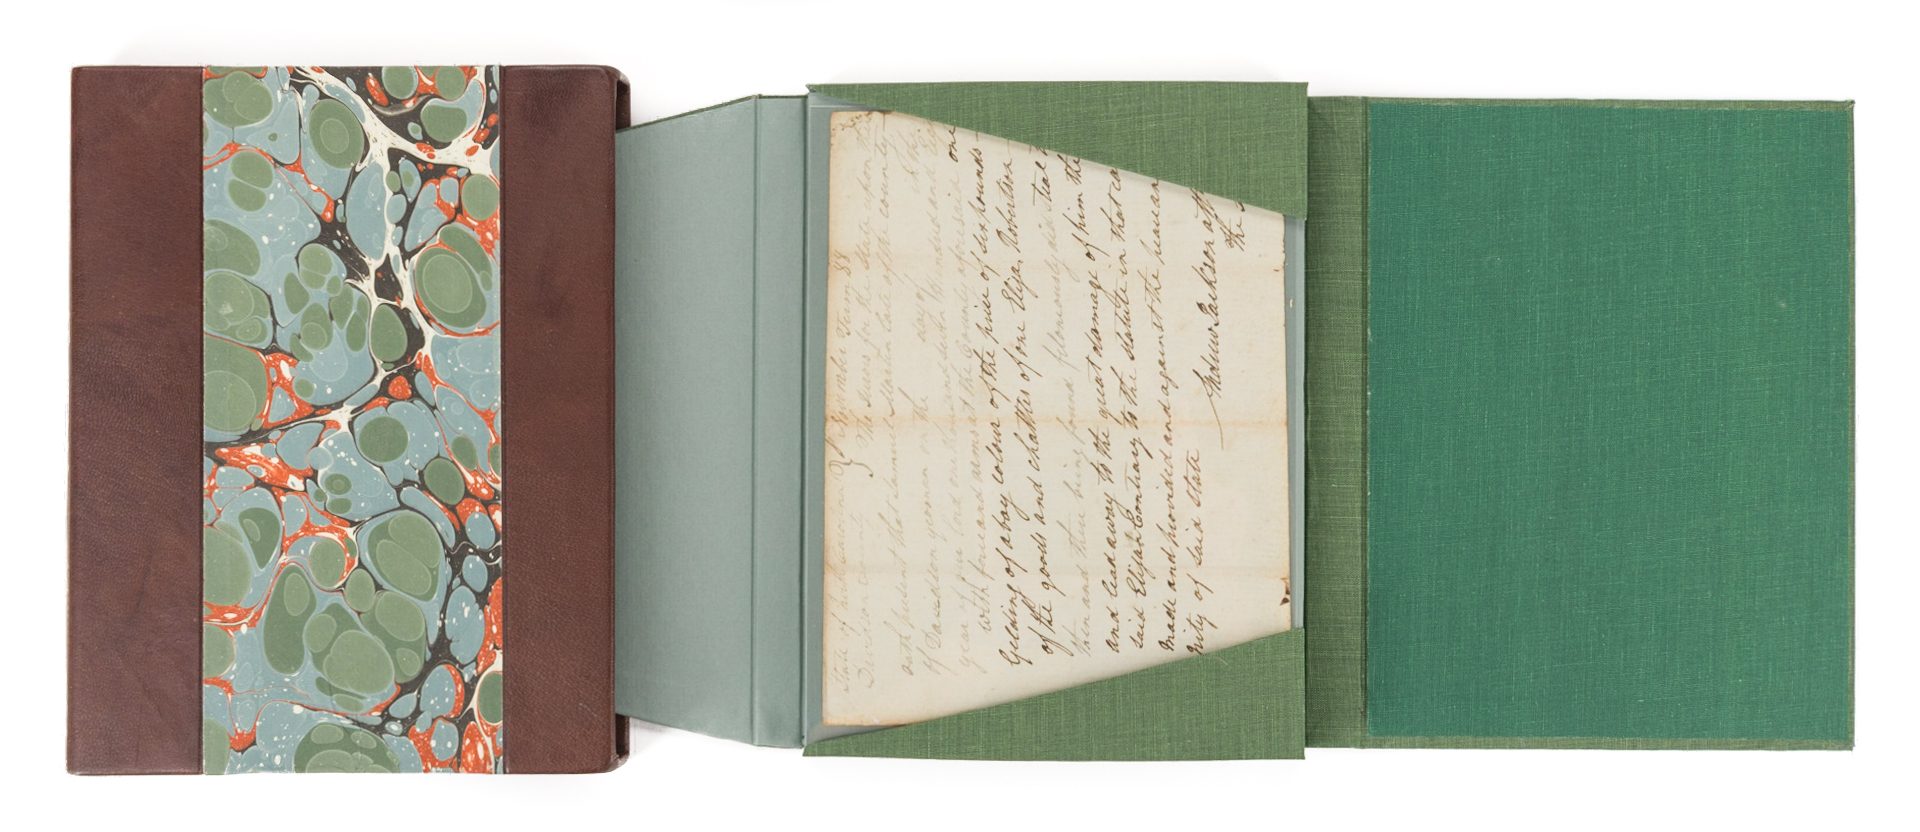 Lot 425: Early Andrew Jackson Signed Legal Document, dated 1788